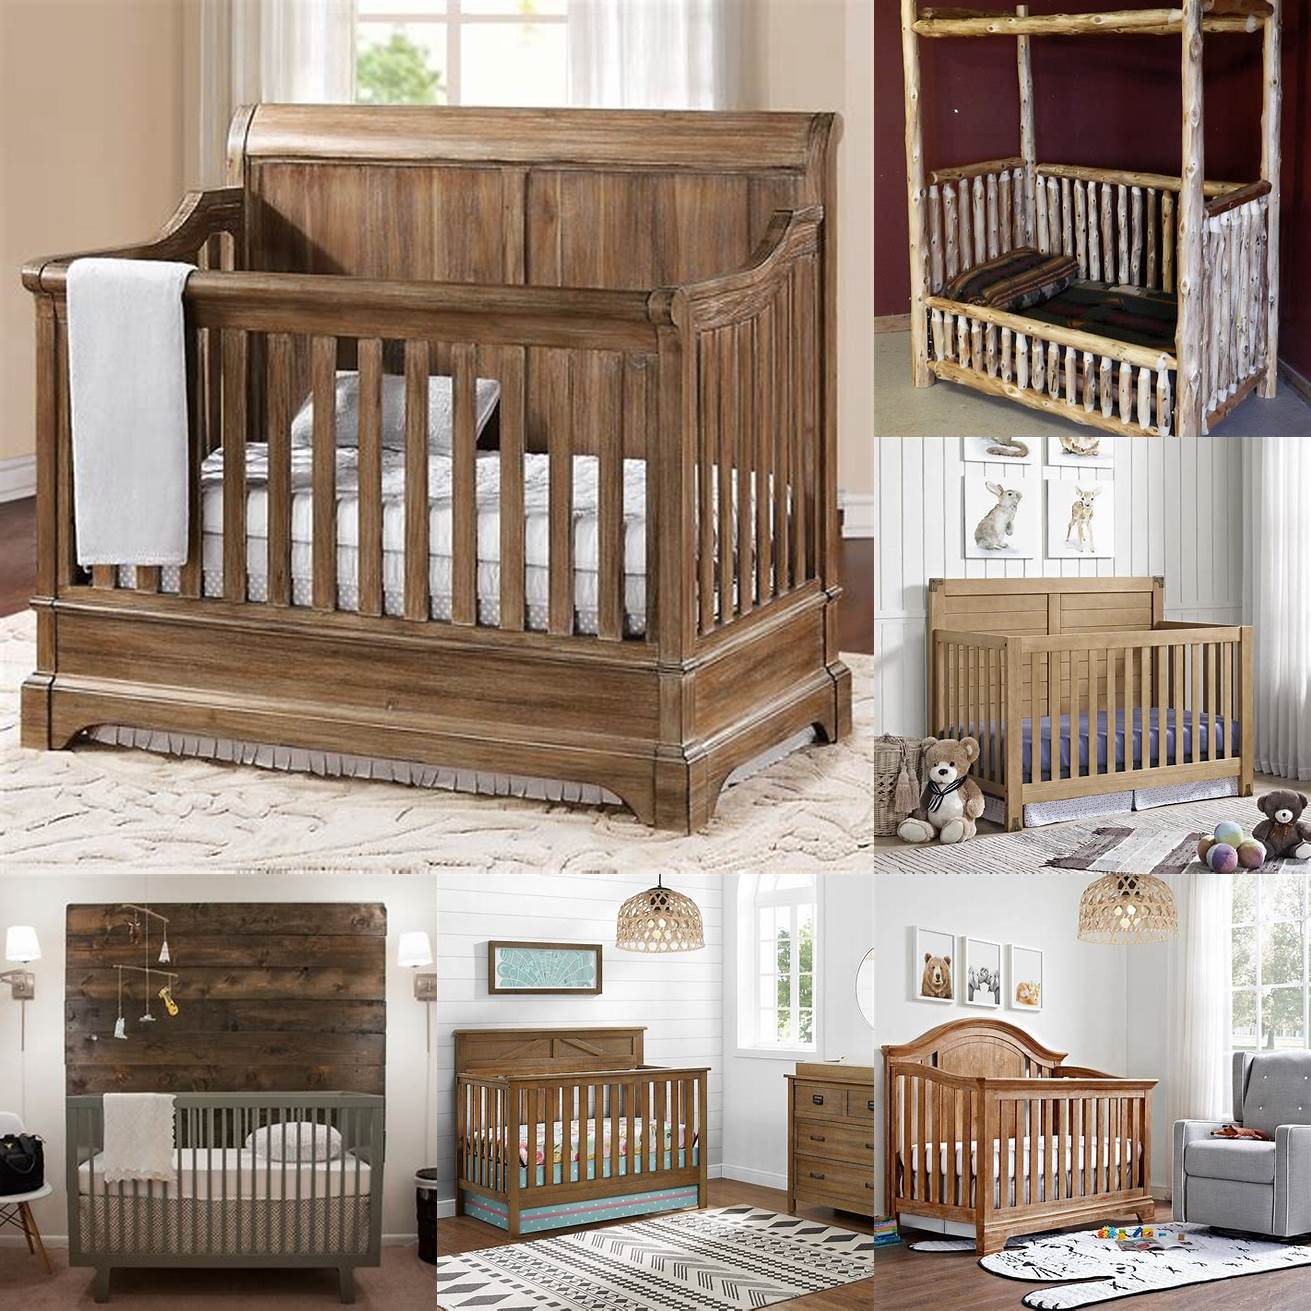 A rustic baby furniture set features natural wood finishes and designs inspired by the outdoors